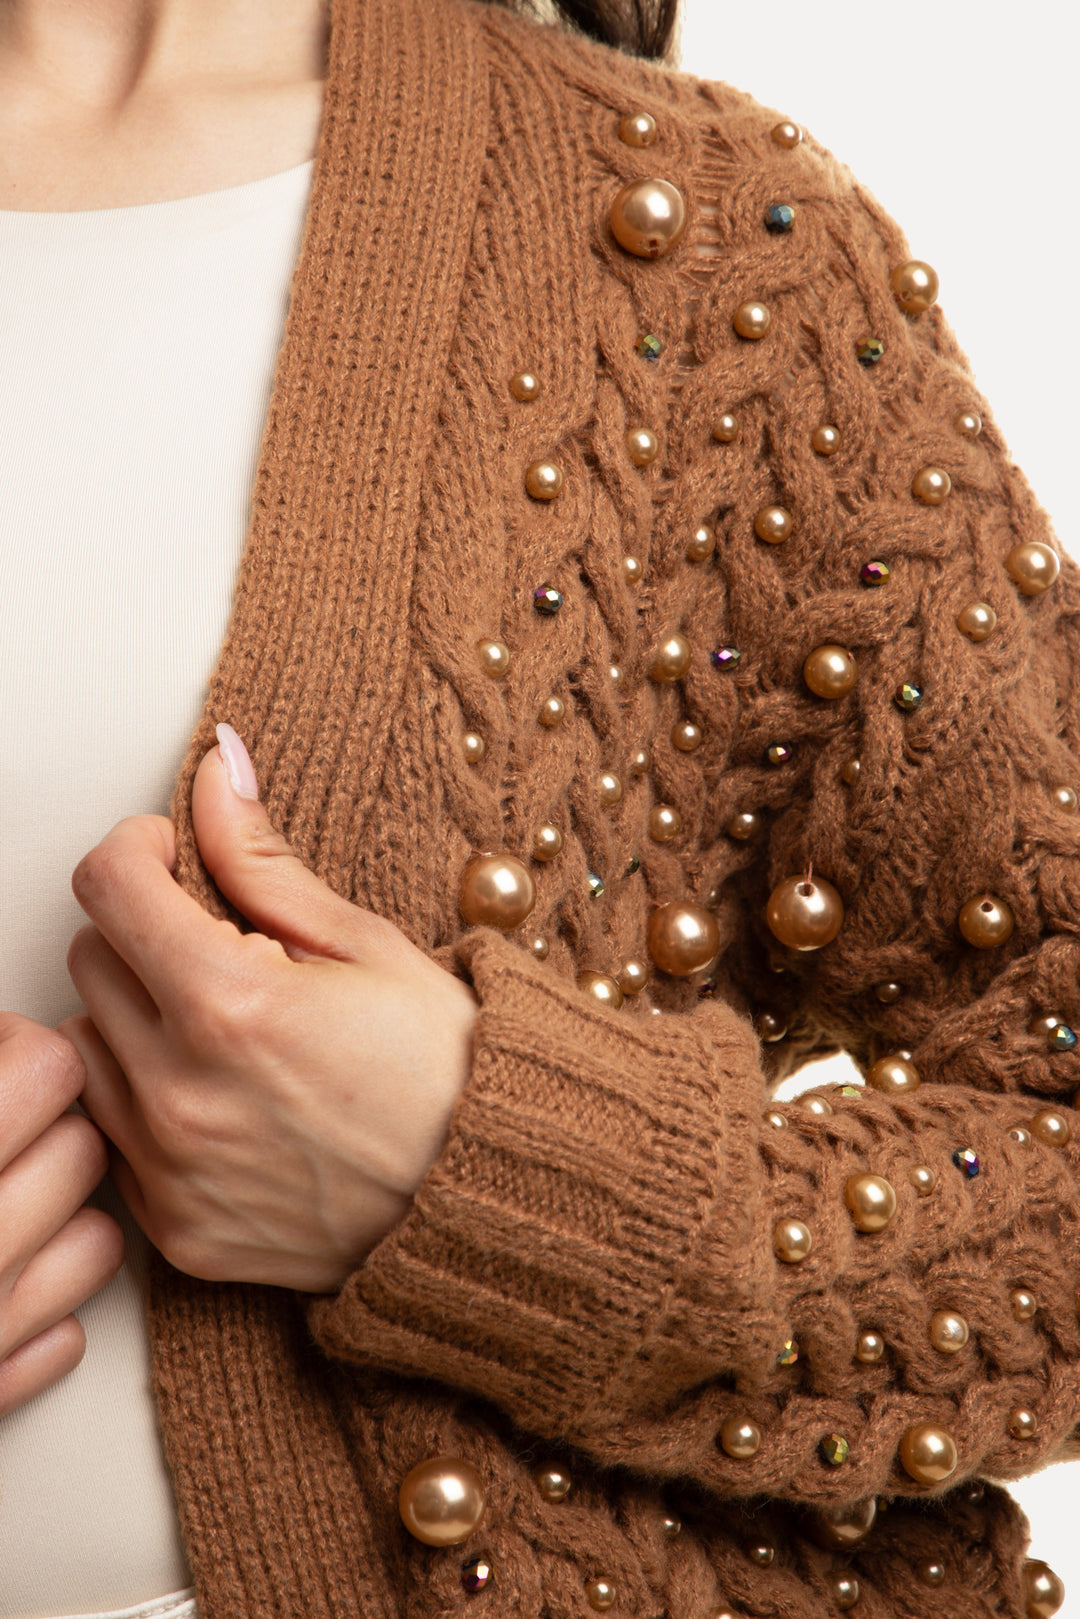 Party Pearl Cardigan